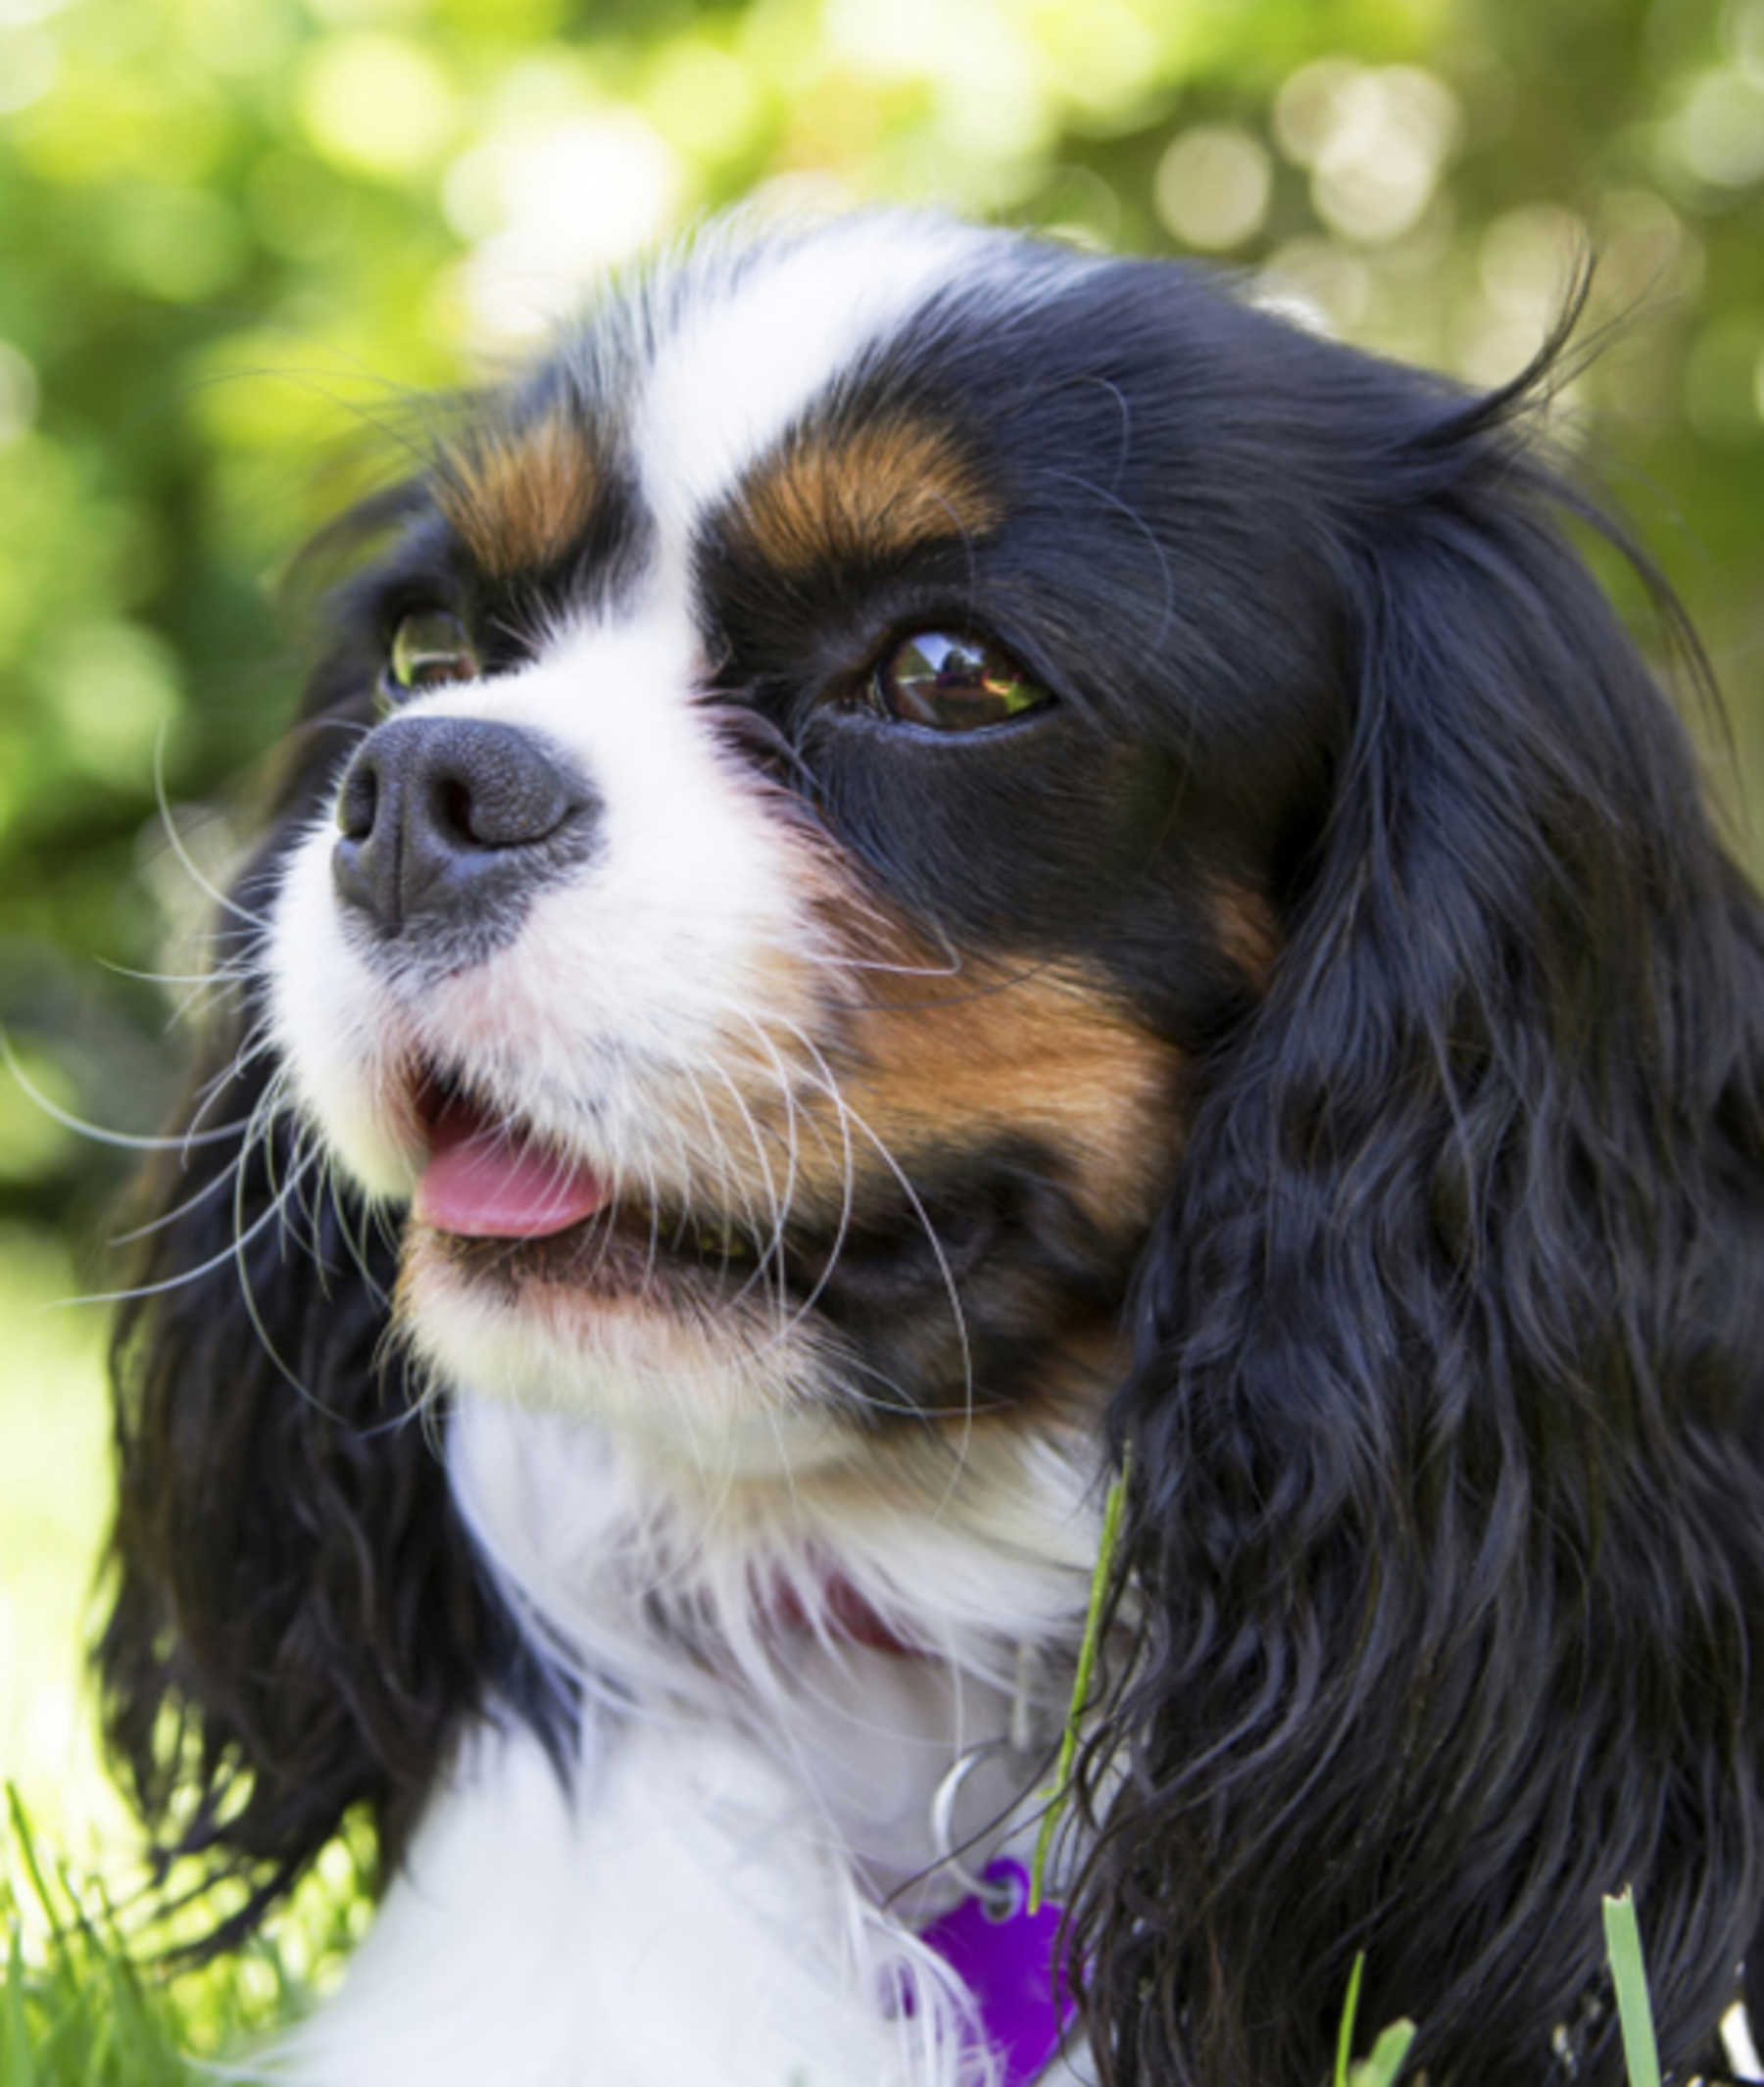 10 Cool Facts About Cavalier King Charles Spaniels | Mom.com